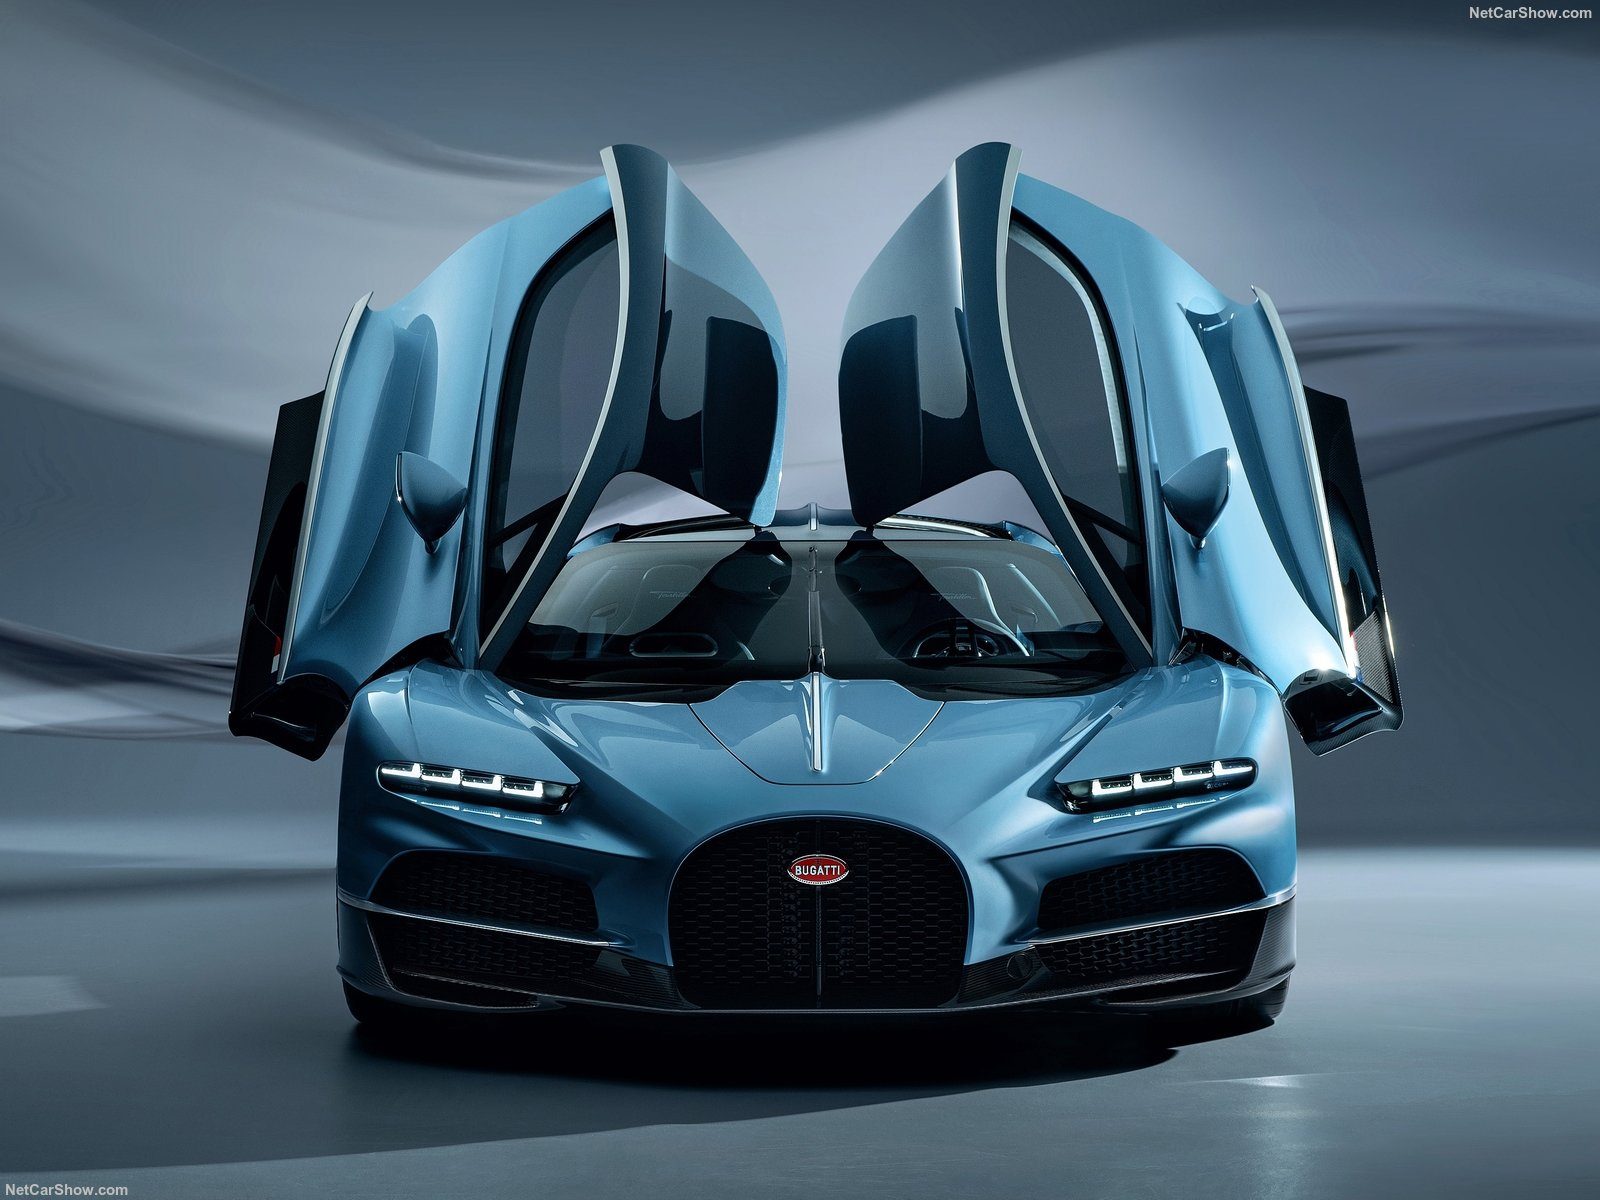 Wingy thingy. Dihedral doors for new Bugatti hypercar, natch.